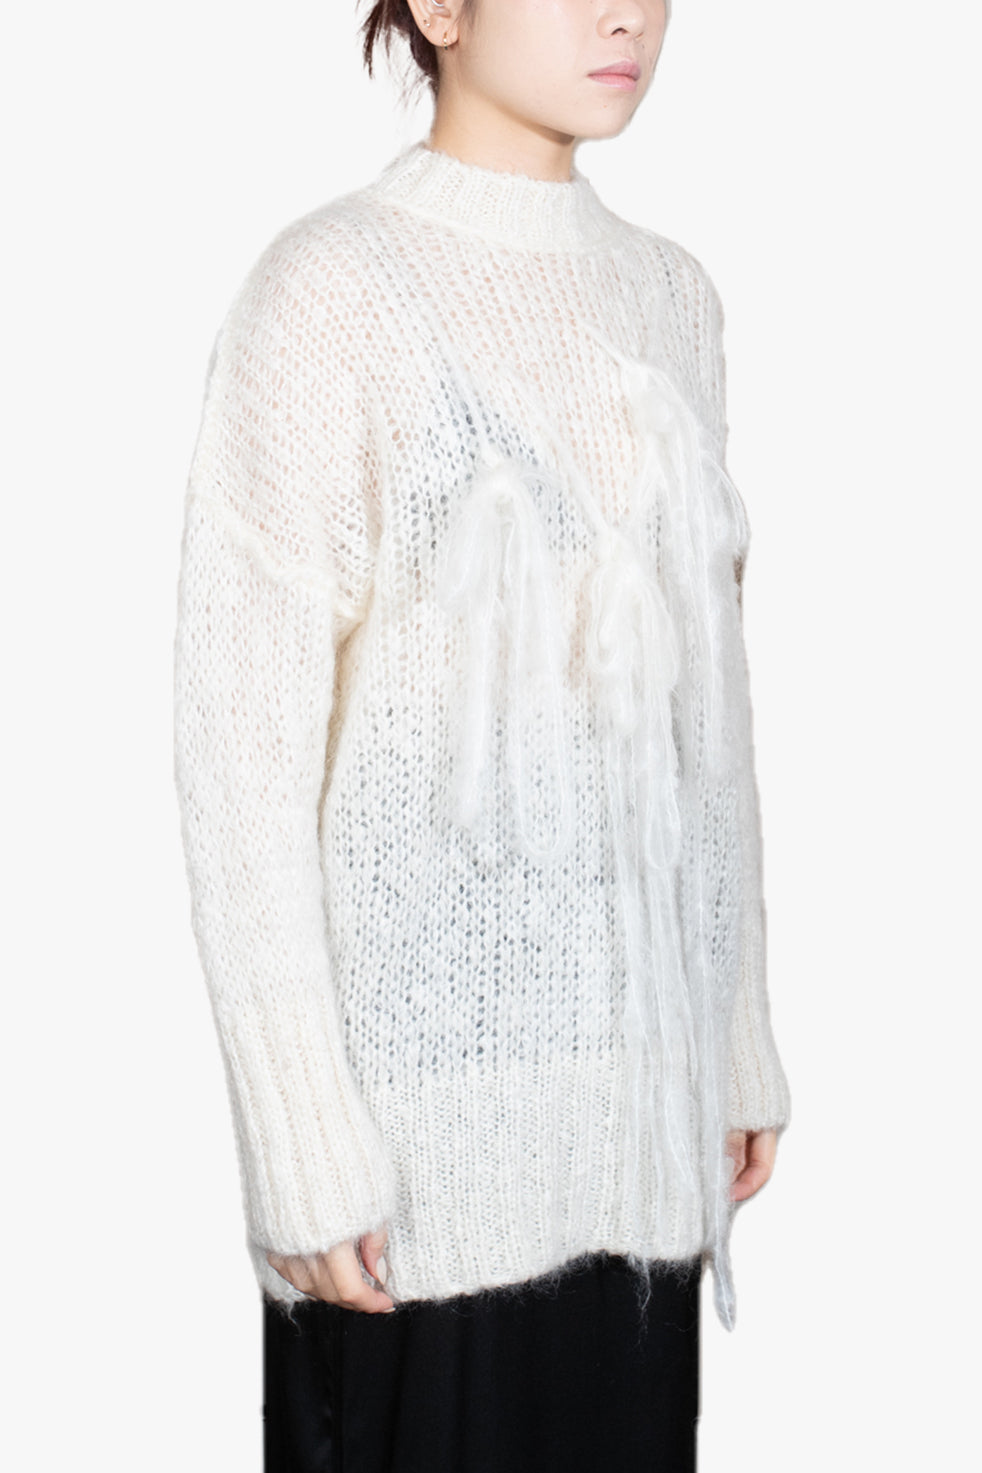 Mohair oversize crew neck sweater floating threads details